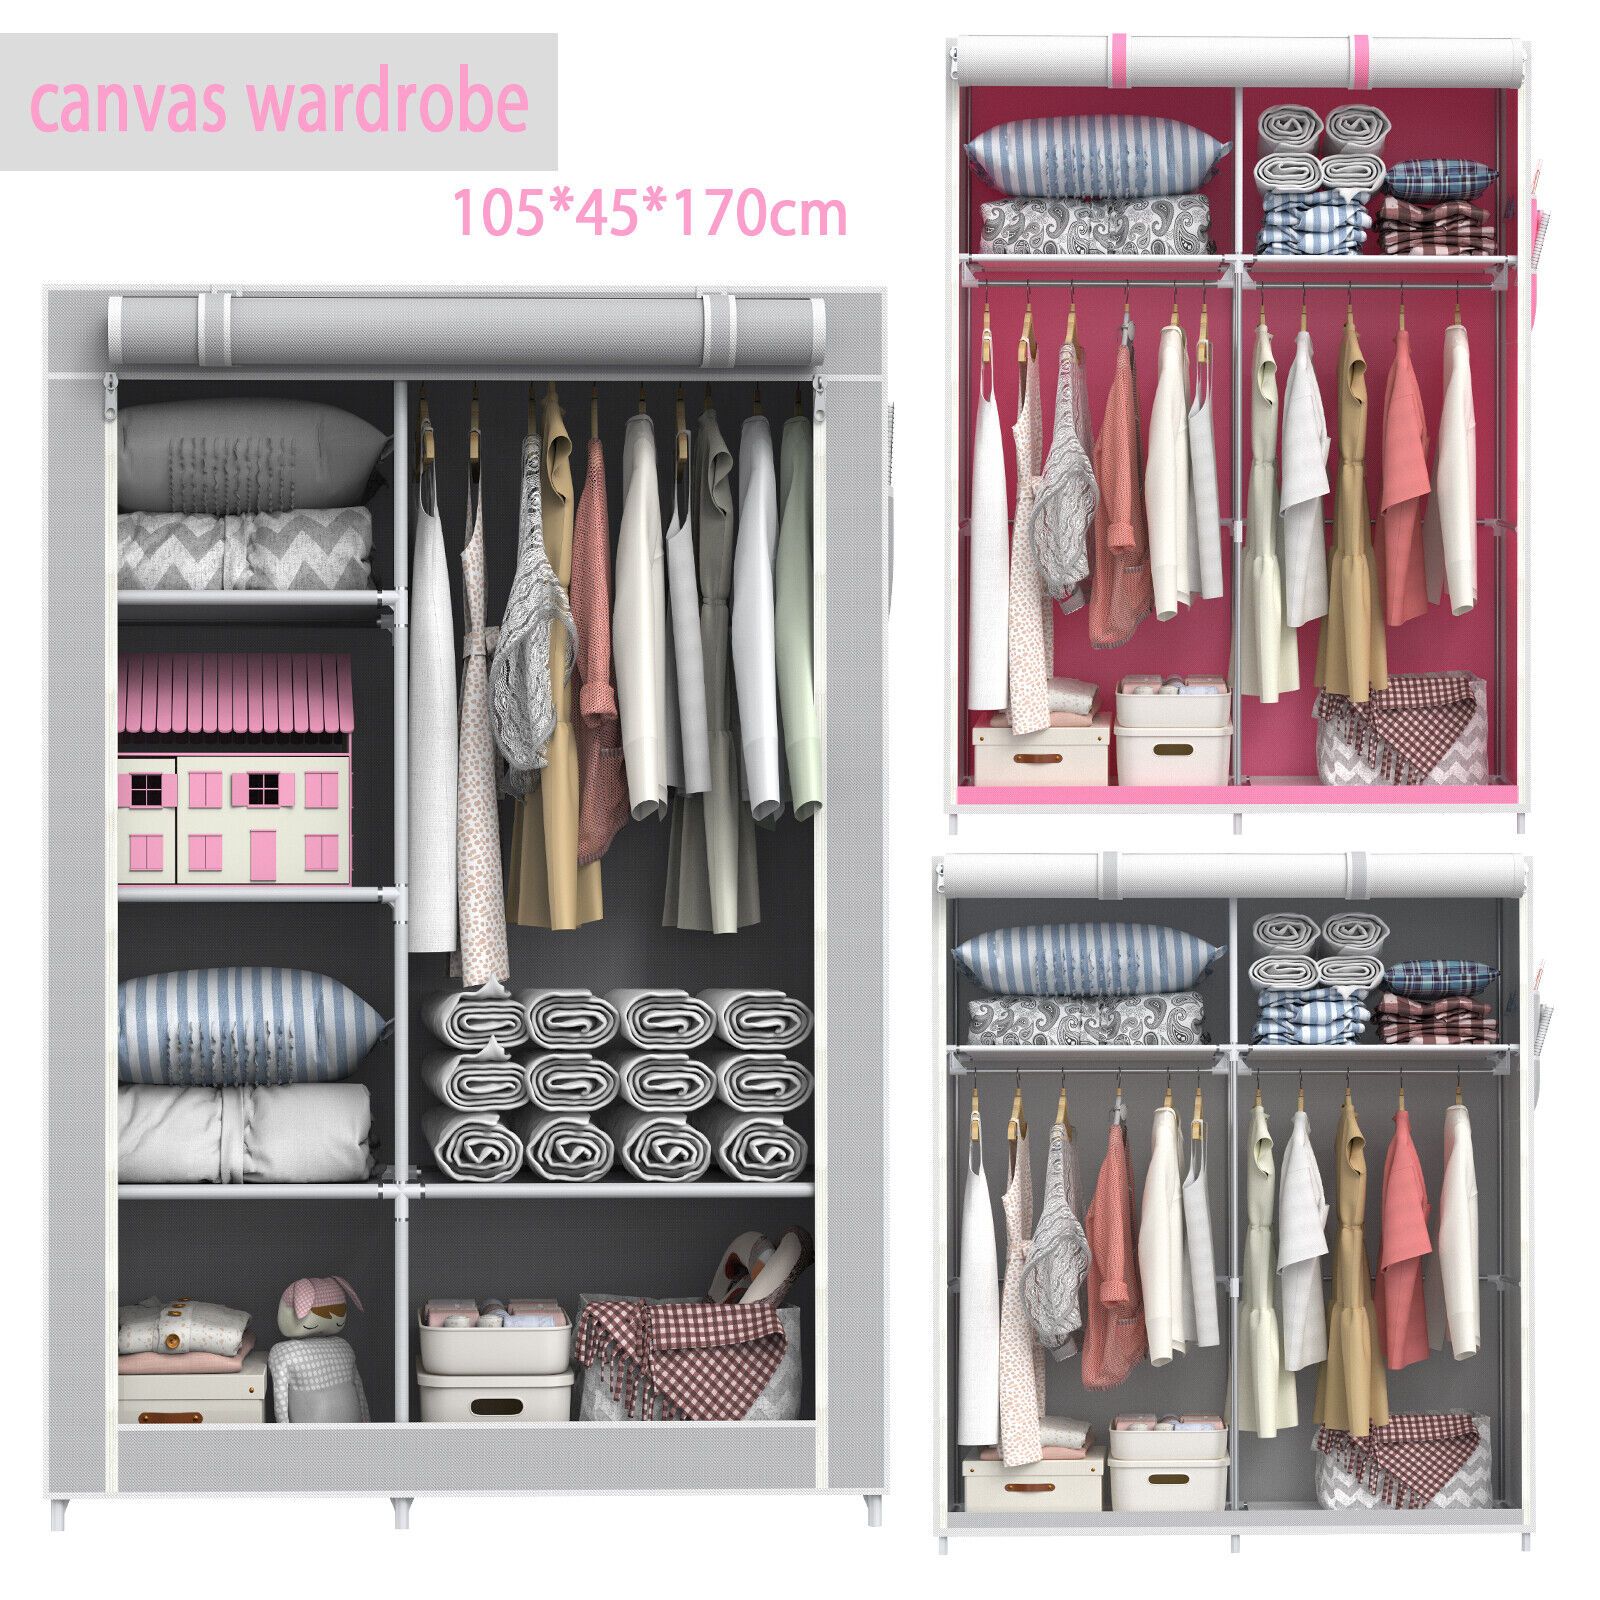 Double Fabric Canvas Wardrobe With Clothes Hanging Rail Storage Shelves  Cupboard | Ebay In Tall Double Hanging Rail Wardrobes (View 11 of 15)